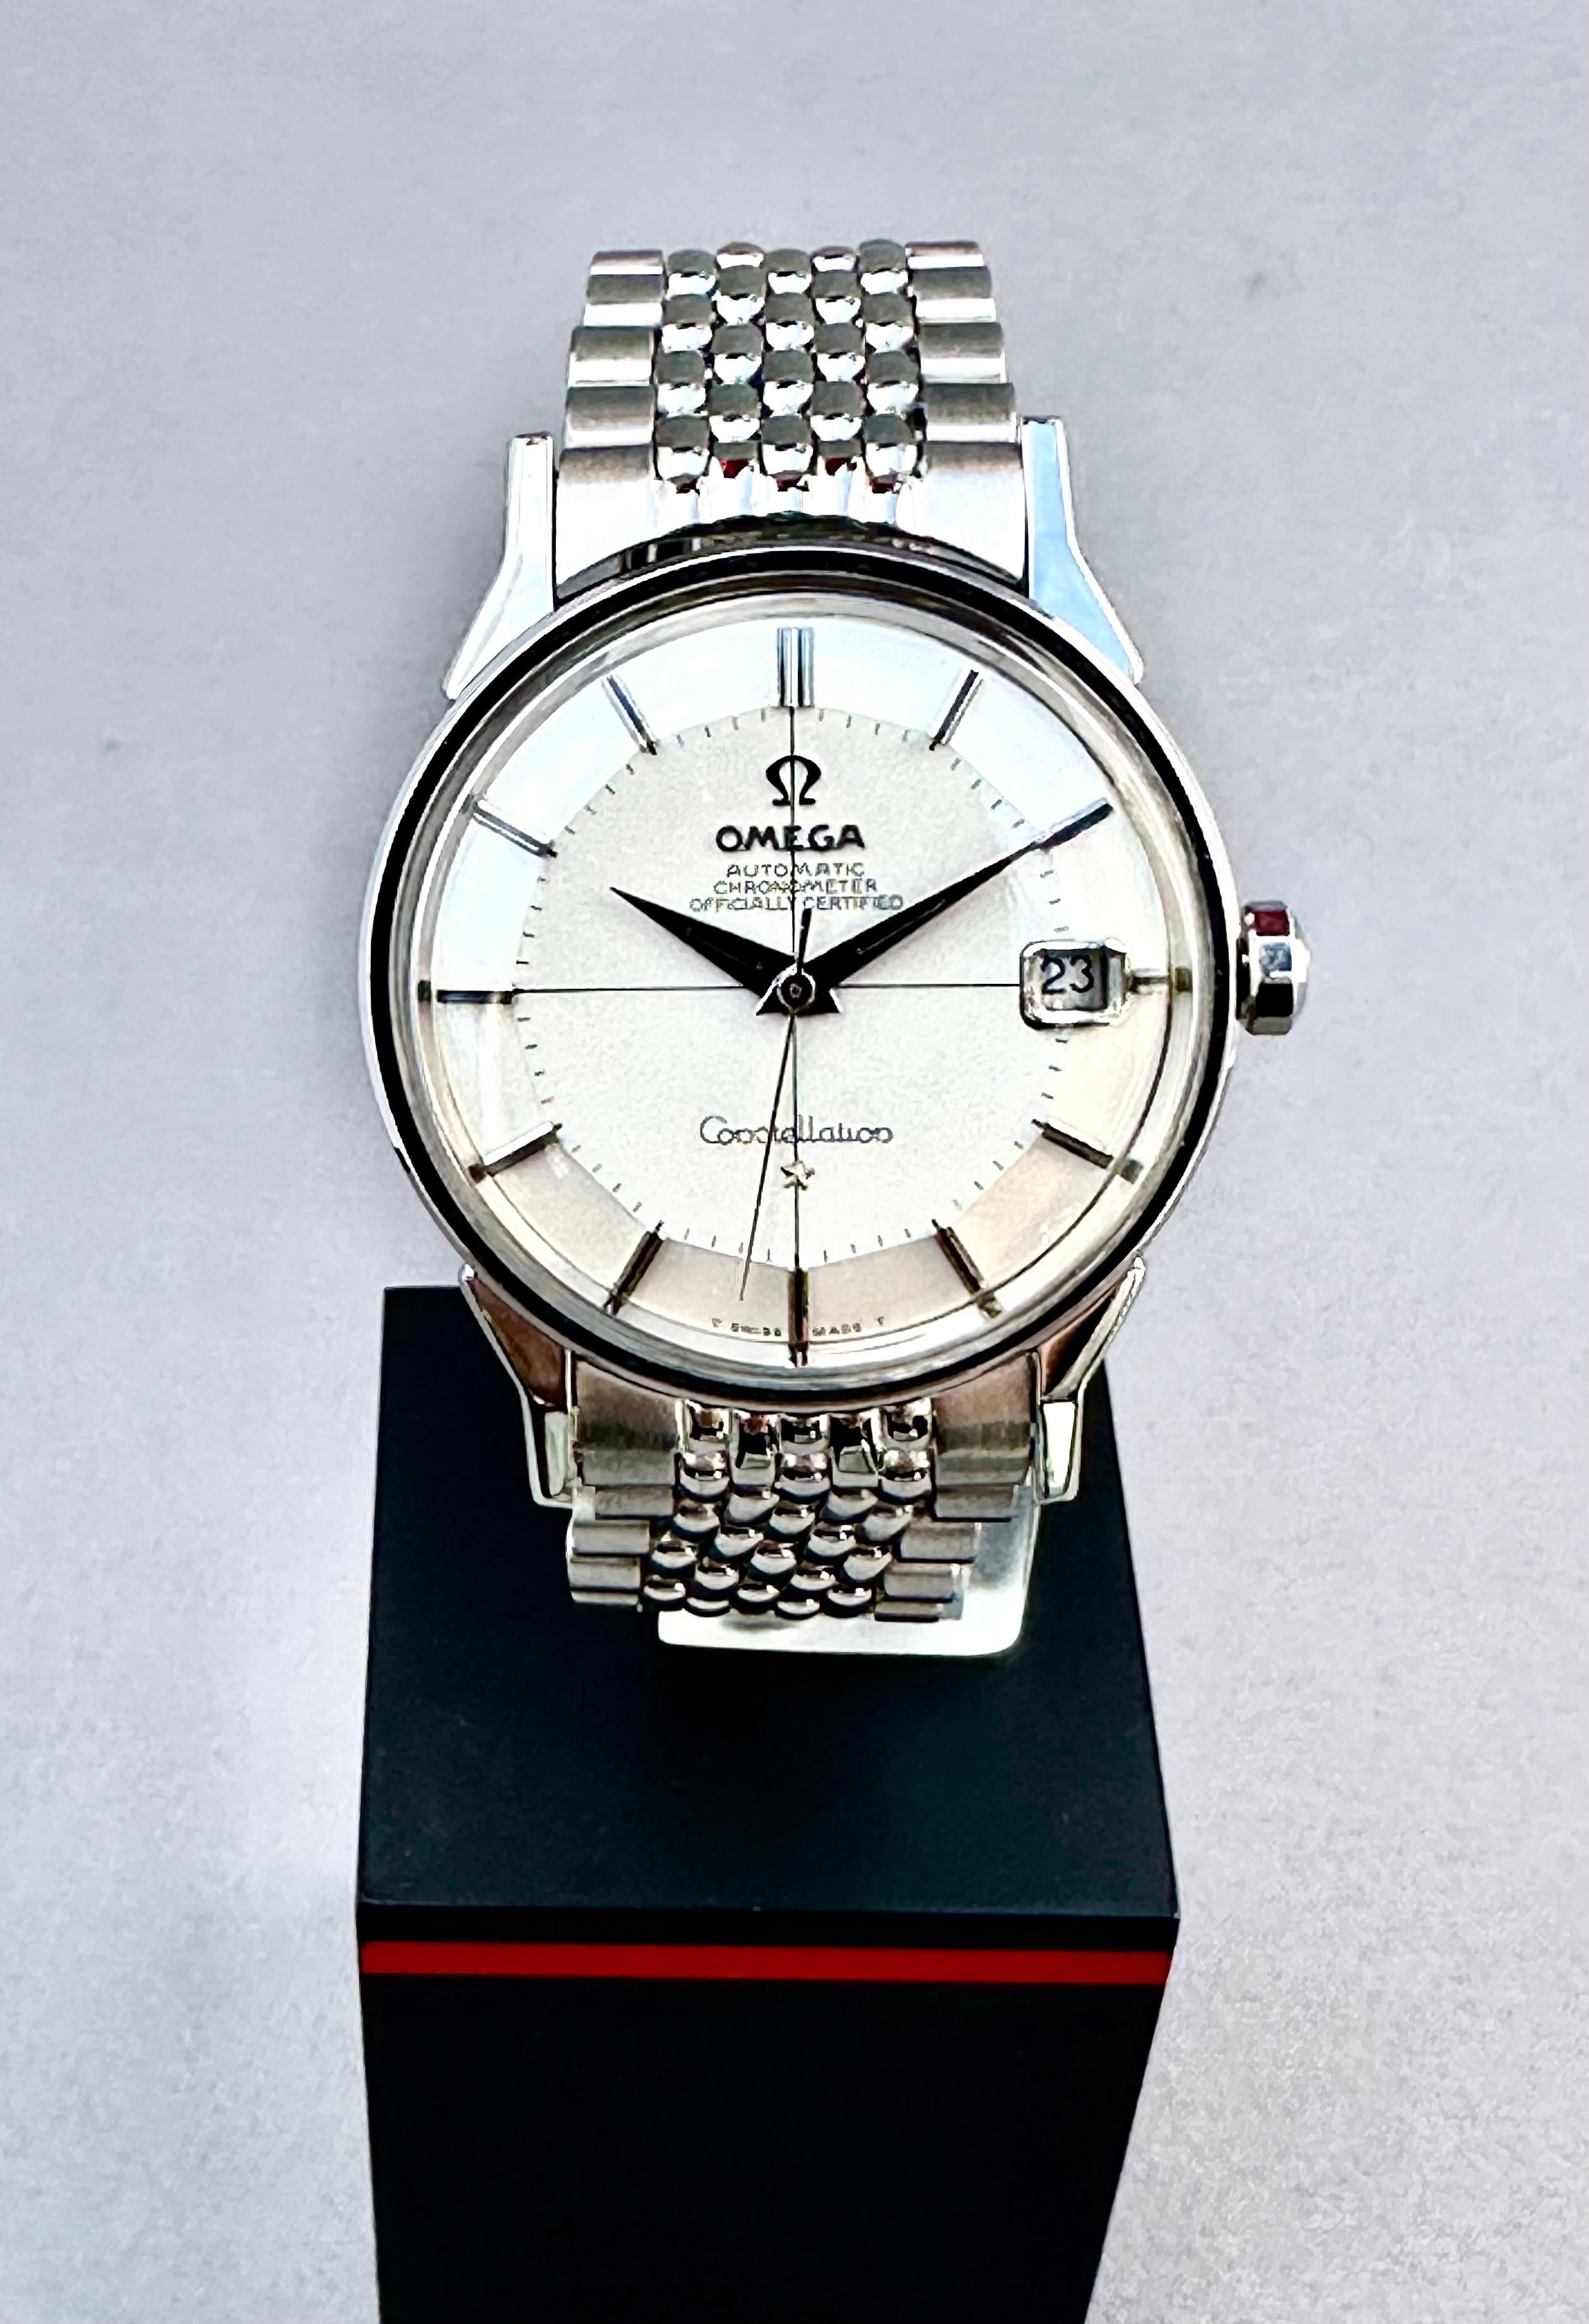 Omega Constellation Pie Pan Automatic
This vintage Omega Constellation ‘Pie-Pan’ stainless steel wristwatch on Original Rice Bracelet
Circa 1962 and is in overall Excellent Condition as it is Recently Serviced.
Original White dial with Silver Batons